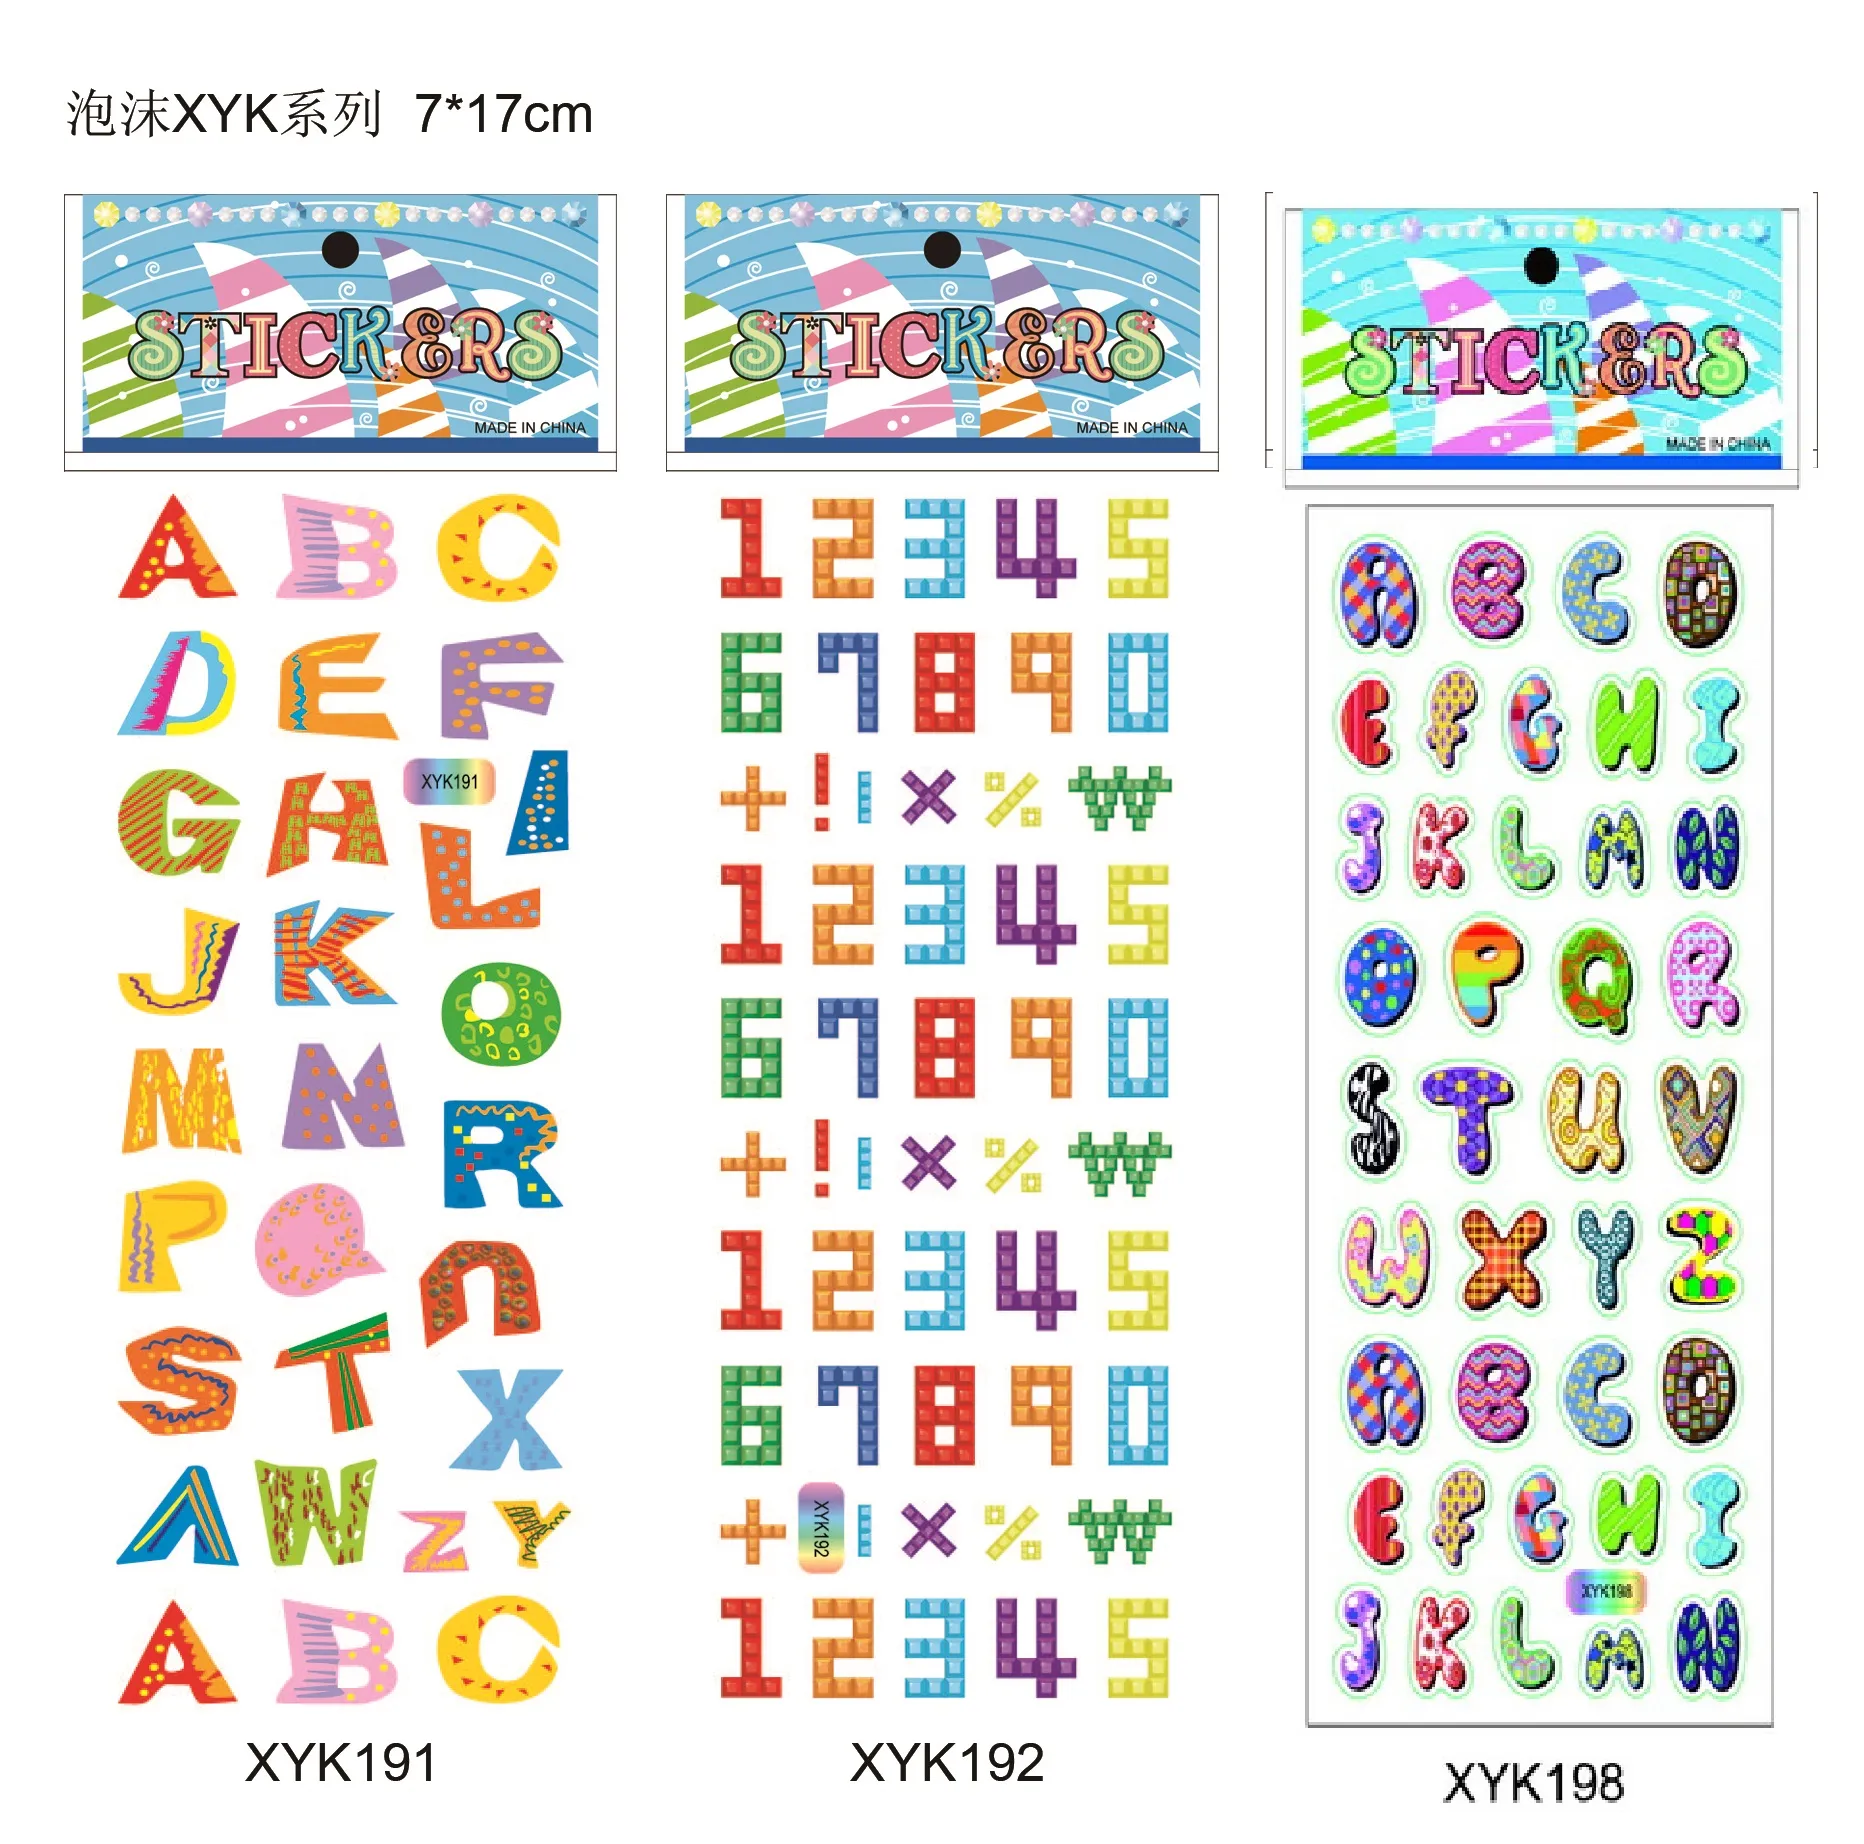 Kindergaten Gifts 3D Stickers 7x17cm Bubble Stickers Party Favors For Kids  Birthday Decoration From Cxjgift, $0.08